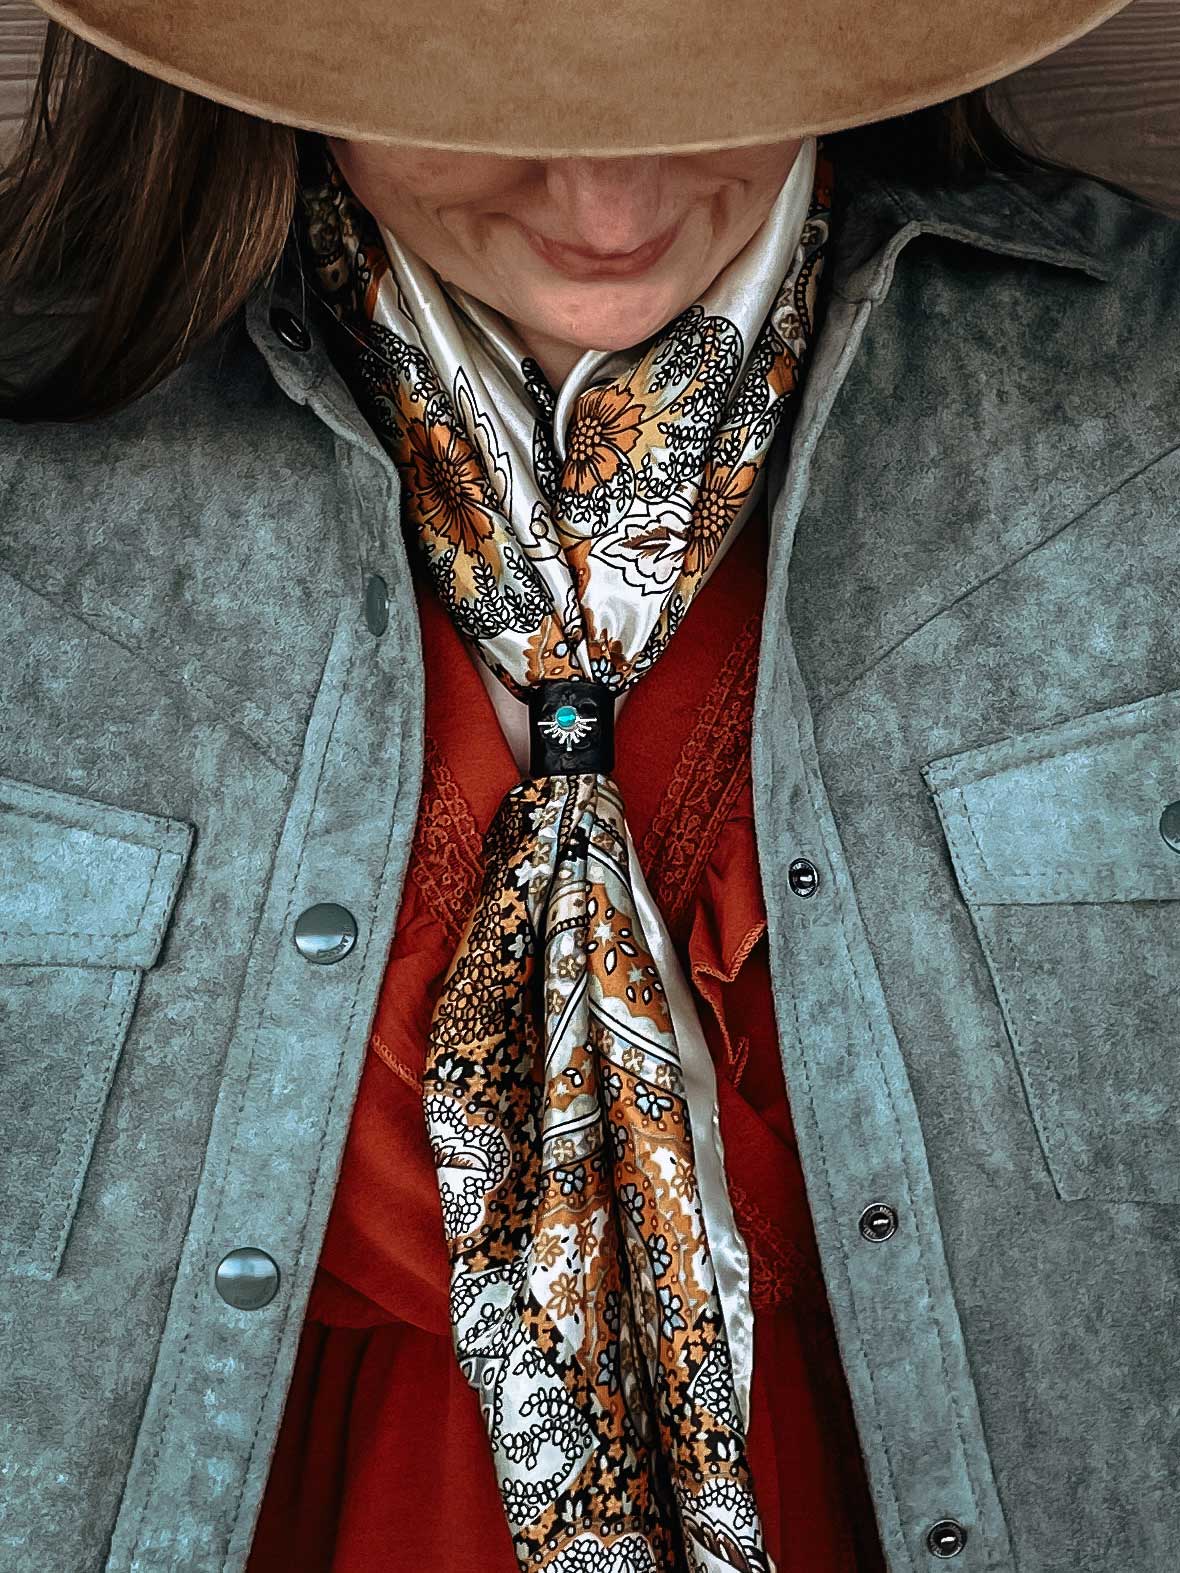 Woman wearing a sterling silver, turquoise, and black leather wild rag scarf slide on a cream colored orange, black, and pale blue silk scarf. She is wearing a light blue fringe jacket and brown cowboy hat.